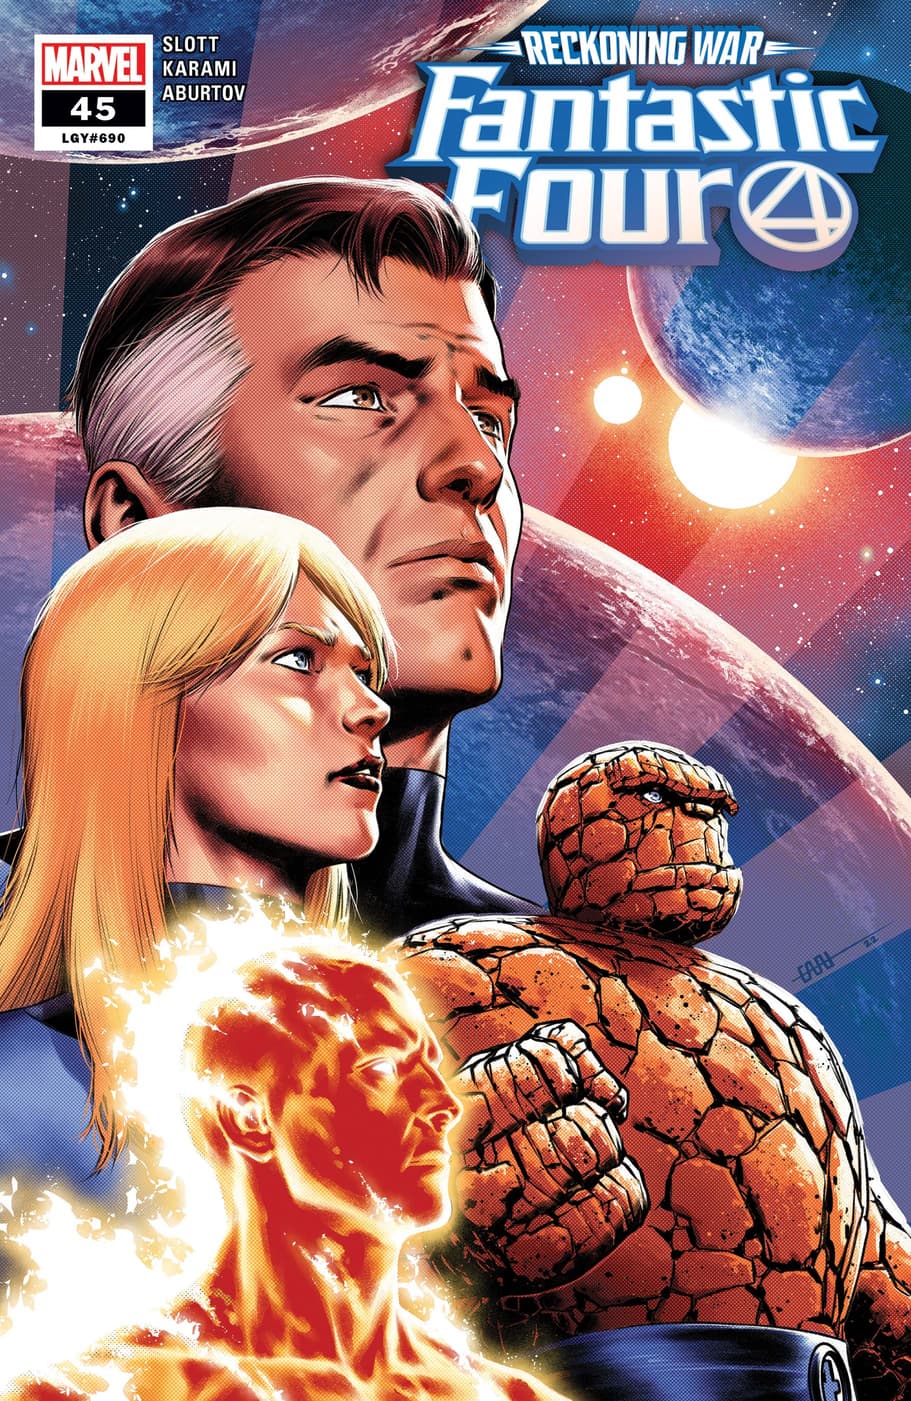 FANTASTIC FOUR (2018) #45 cover by Cafu